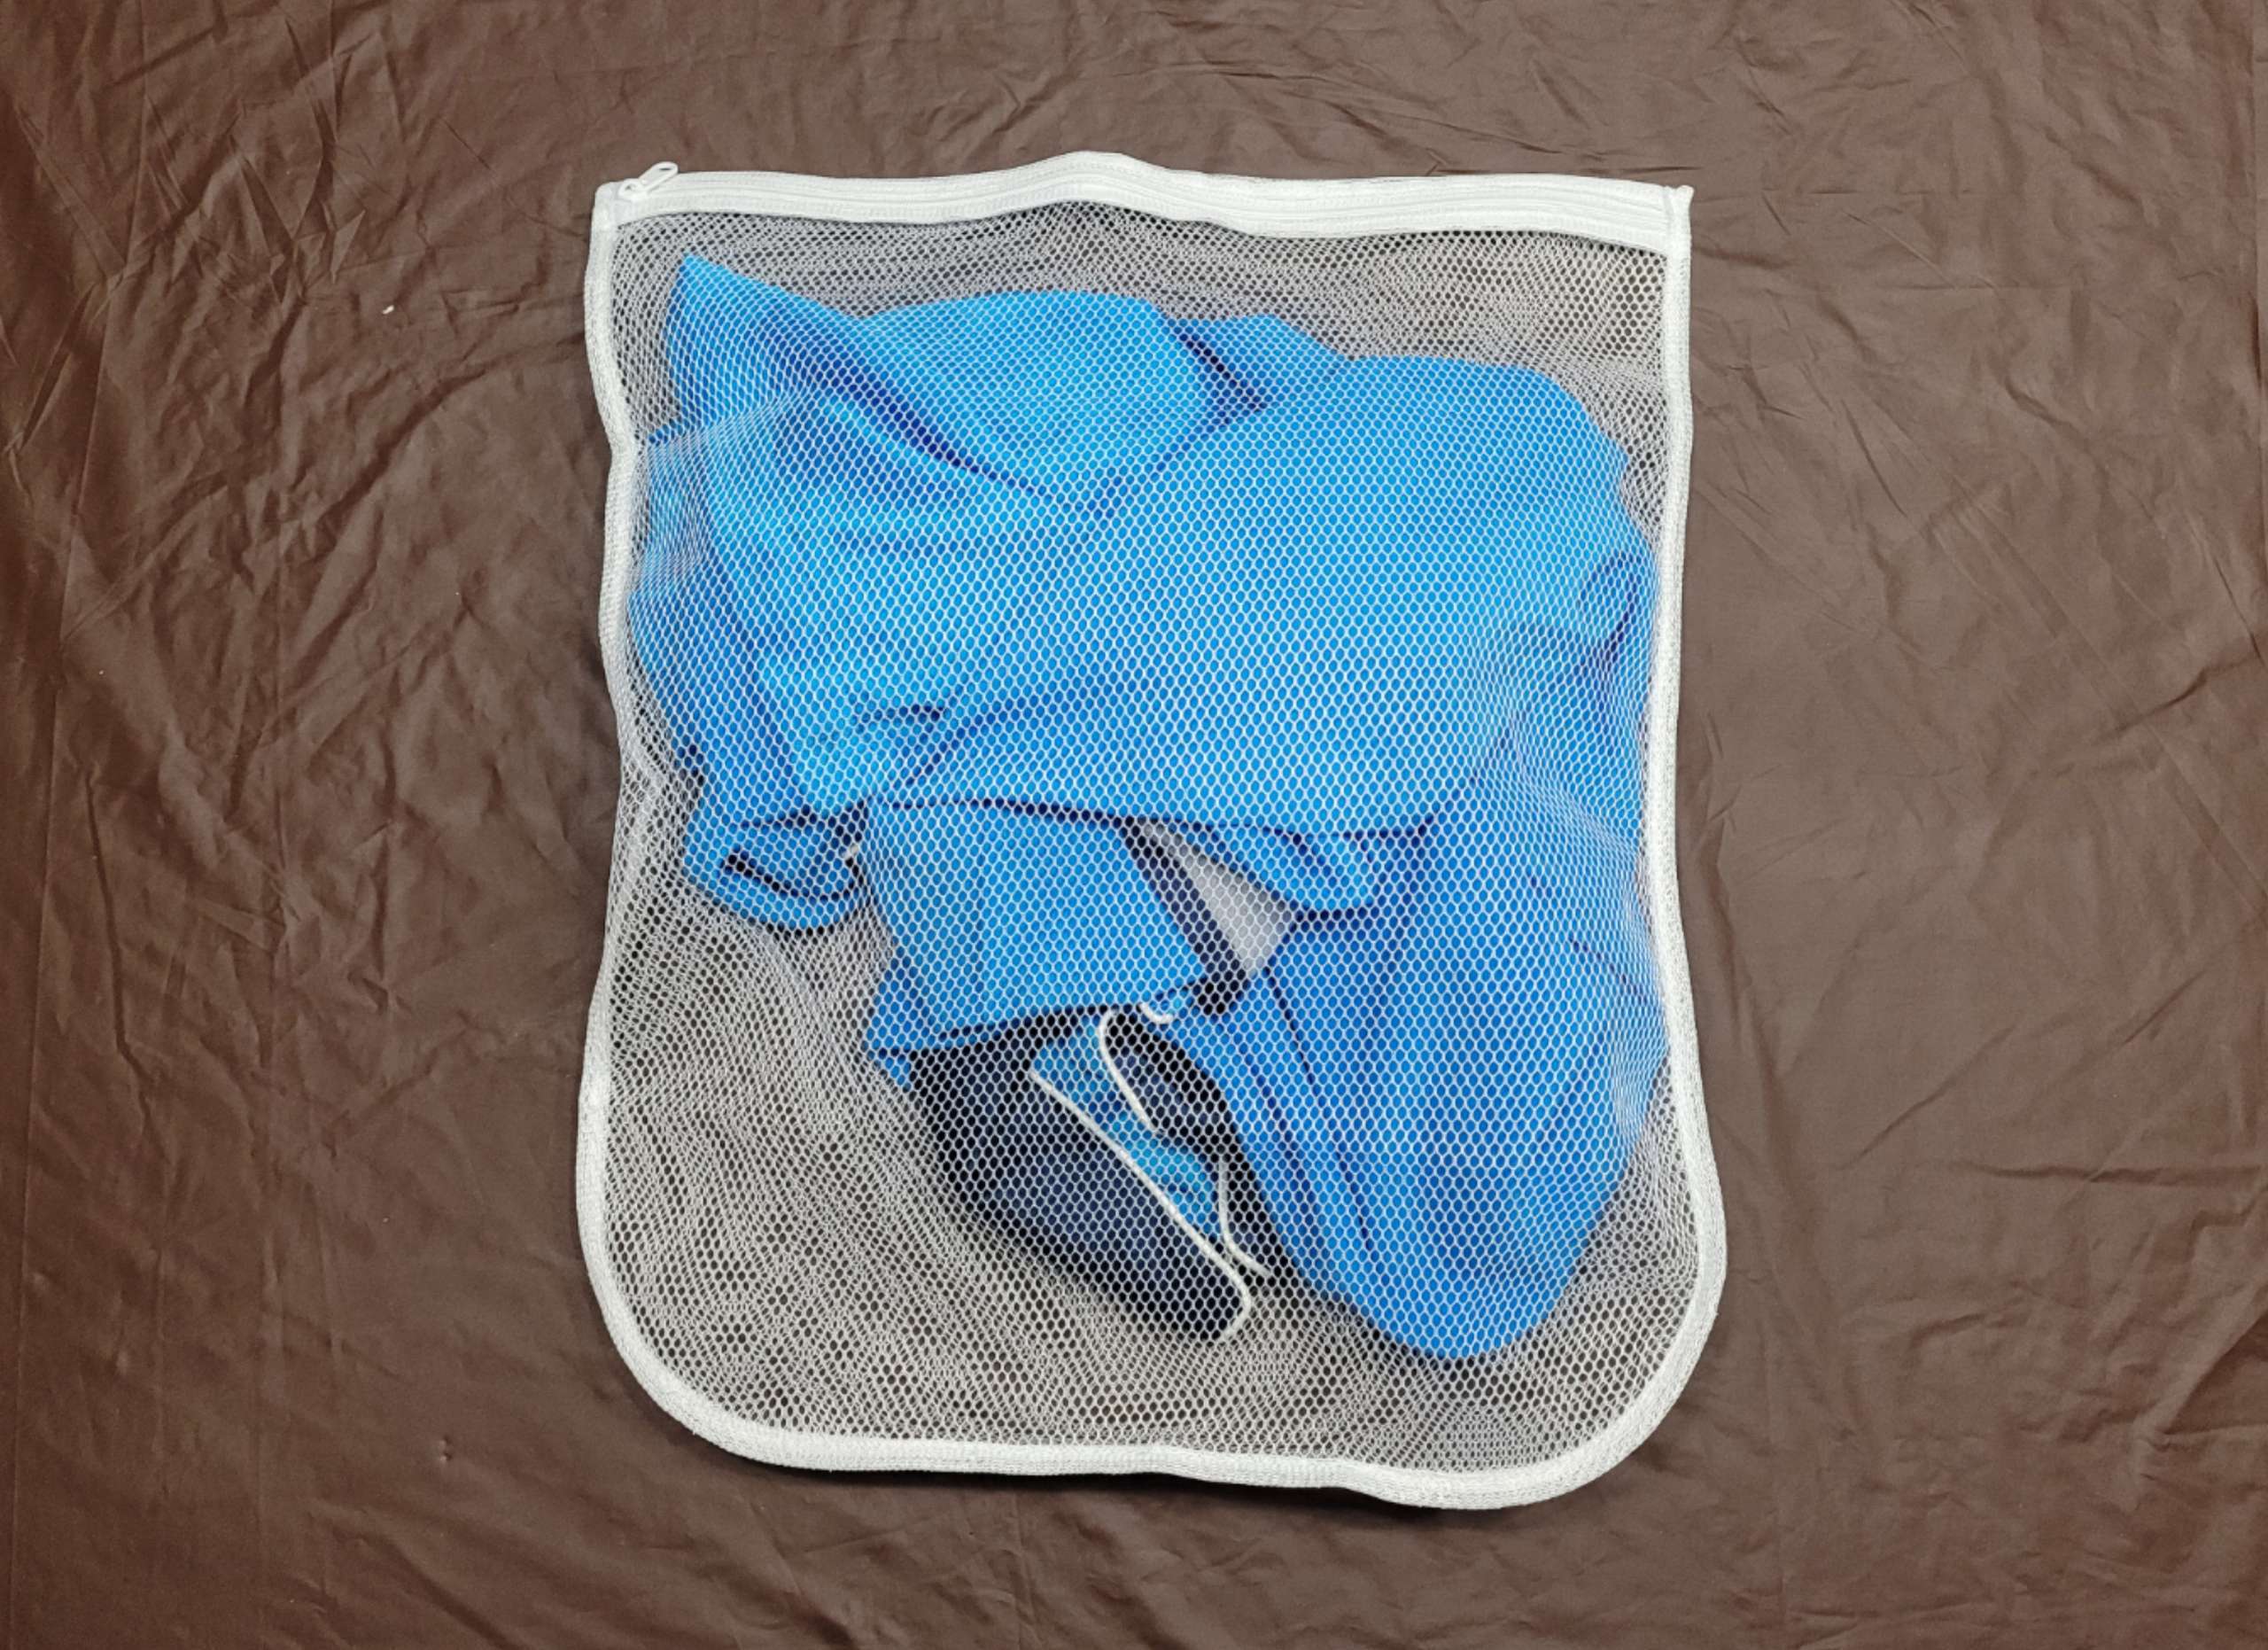 photo of blue satin pajamas in a mesh laundry bag